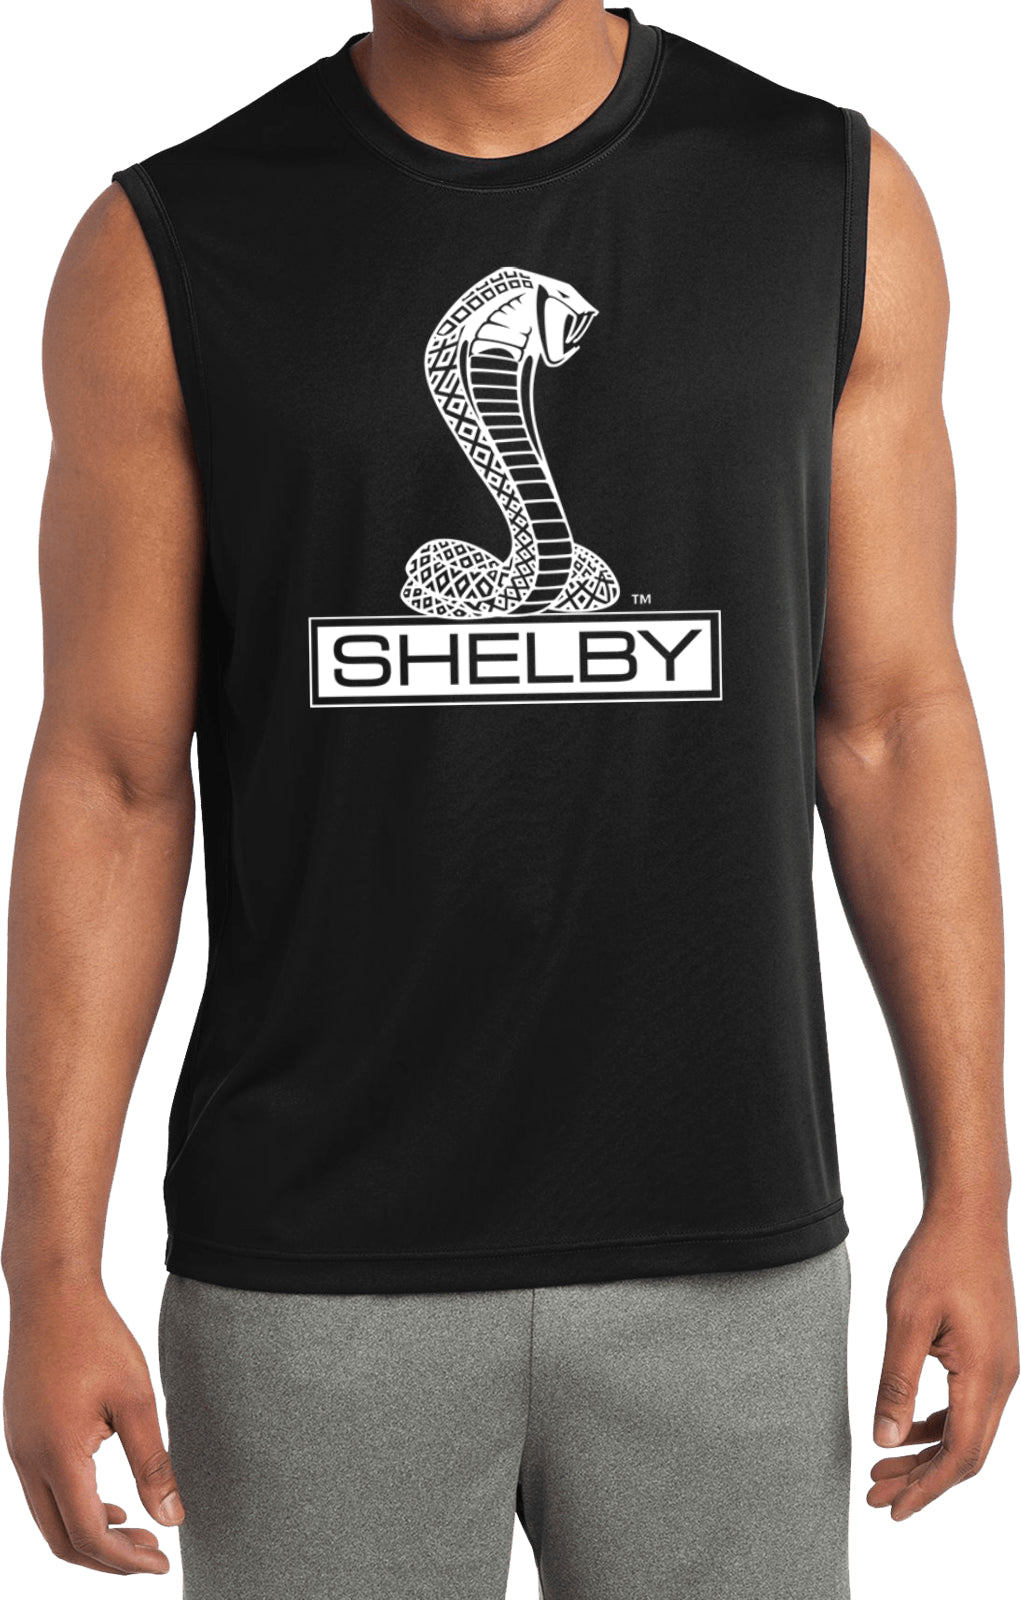 Ford Mustang T-shirt Shelby Cobra Sleeveless Competitor Tee